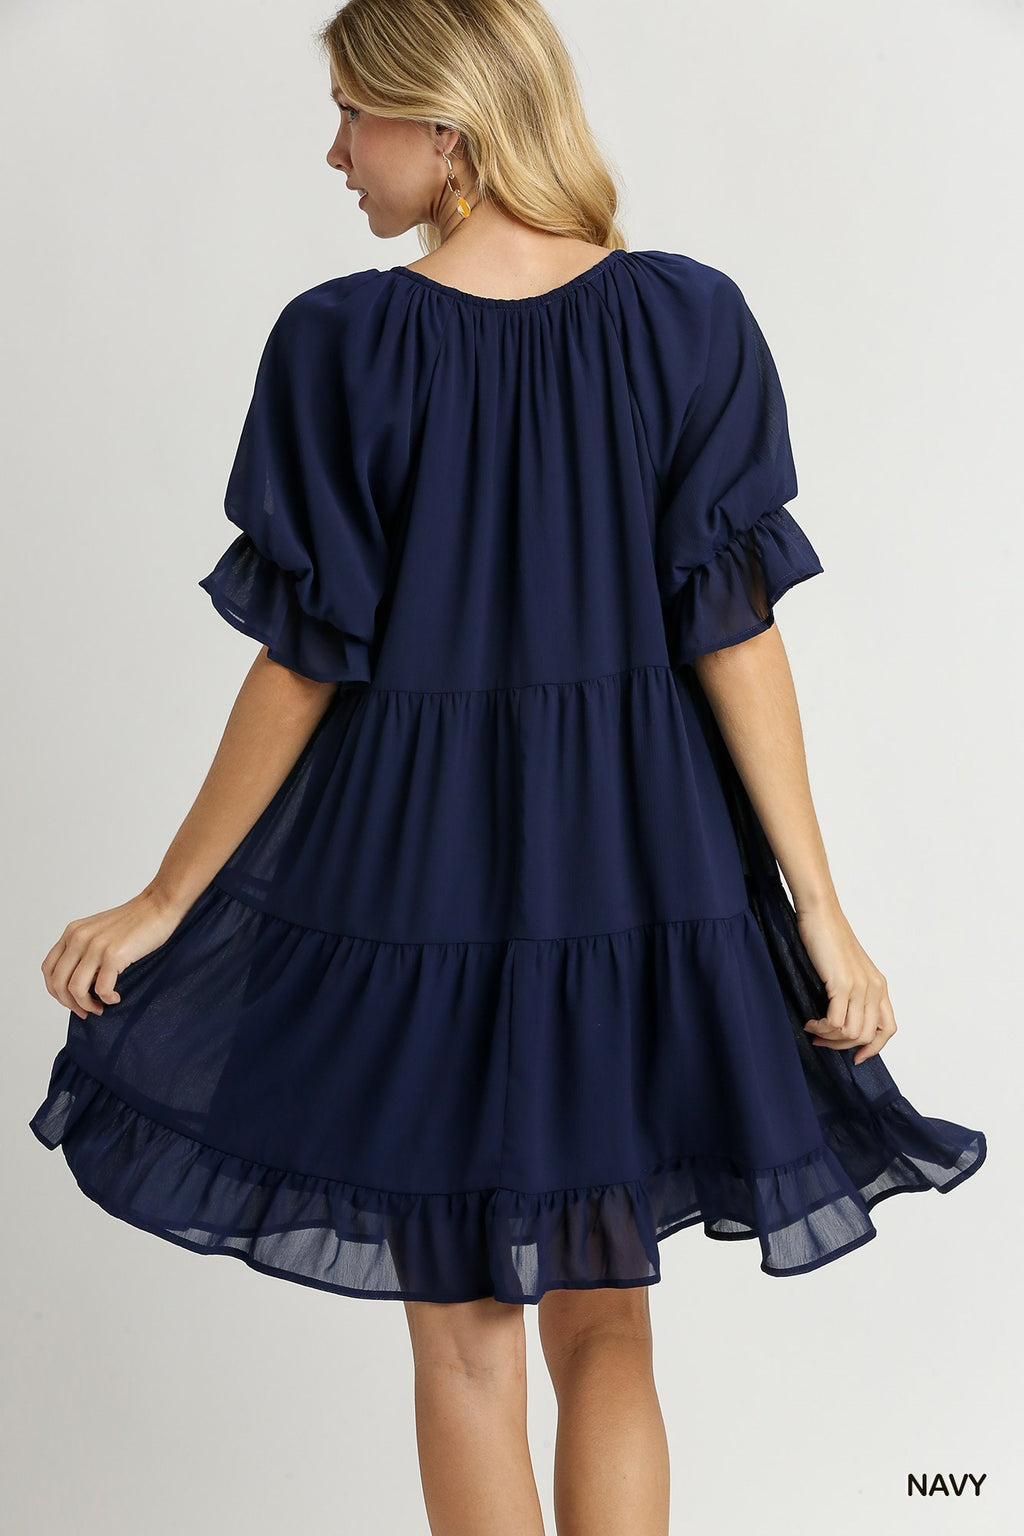 "Shelby" Puff Sleeve Dress, 2 colors